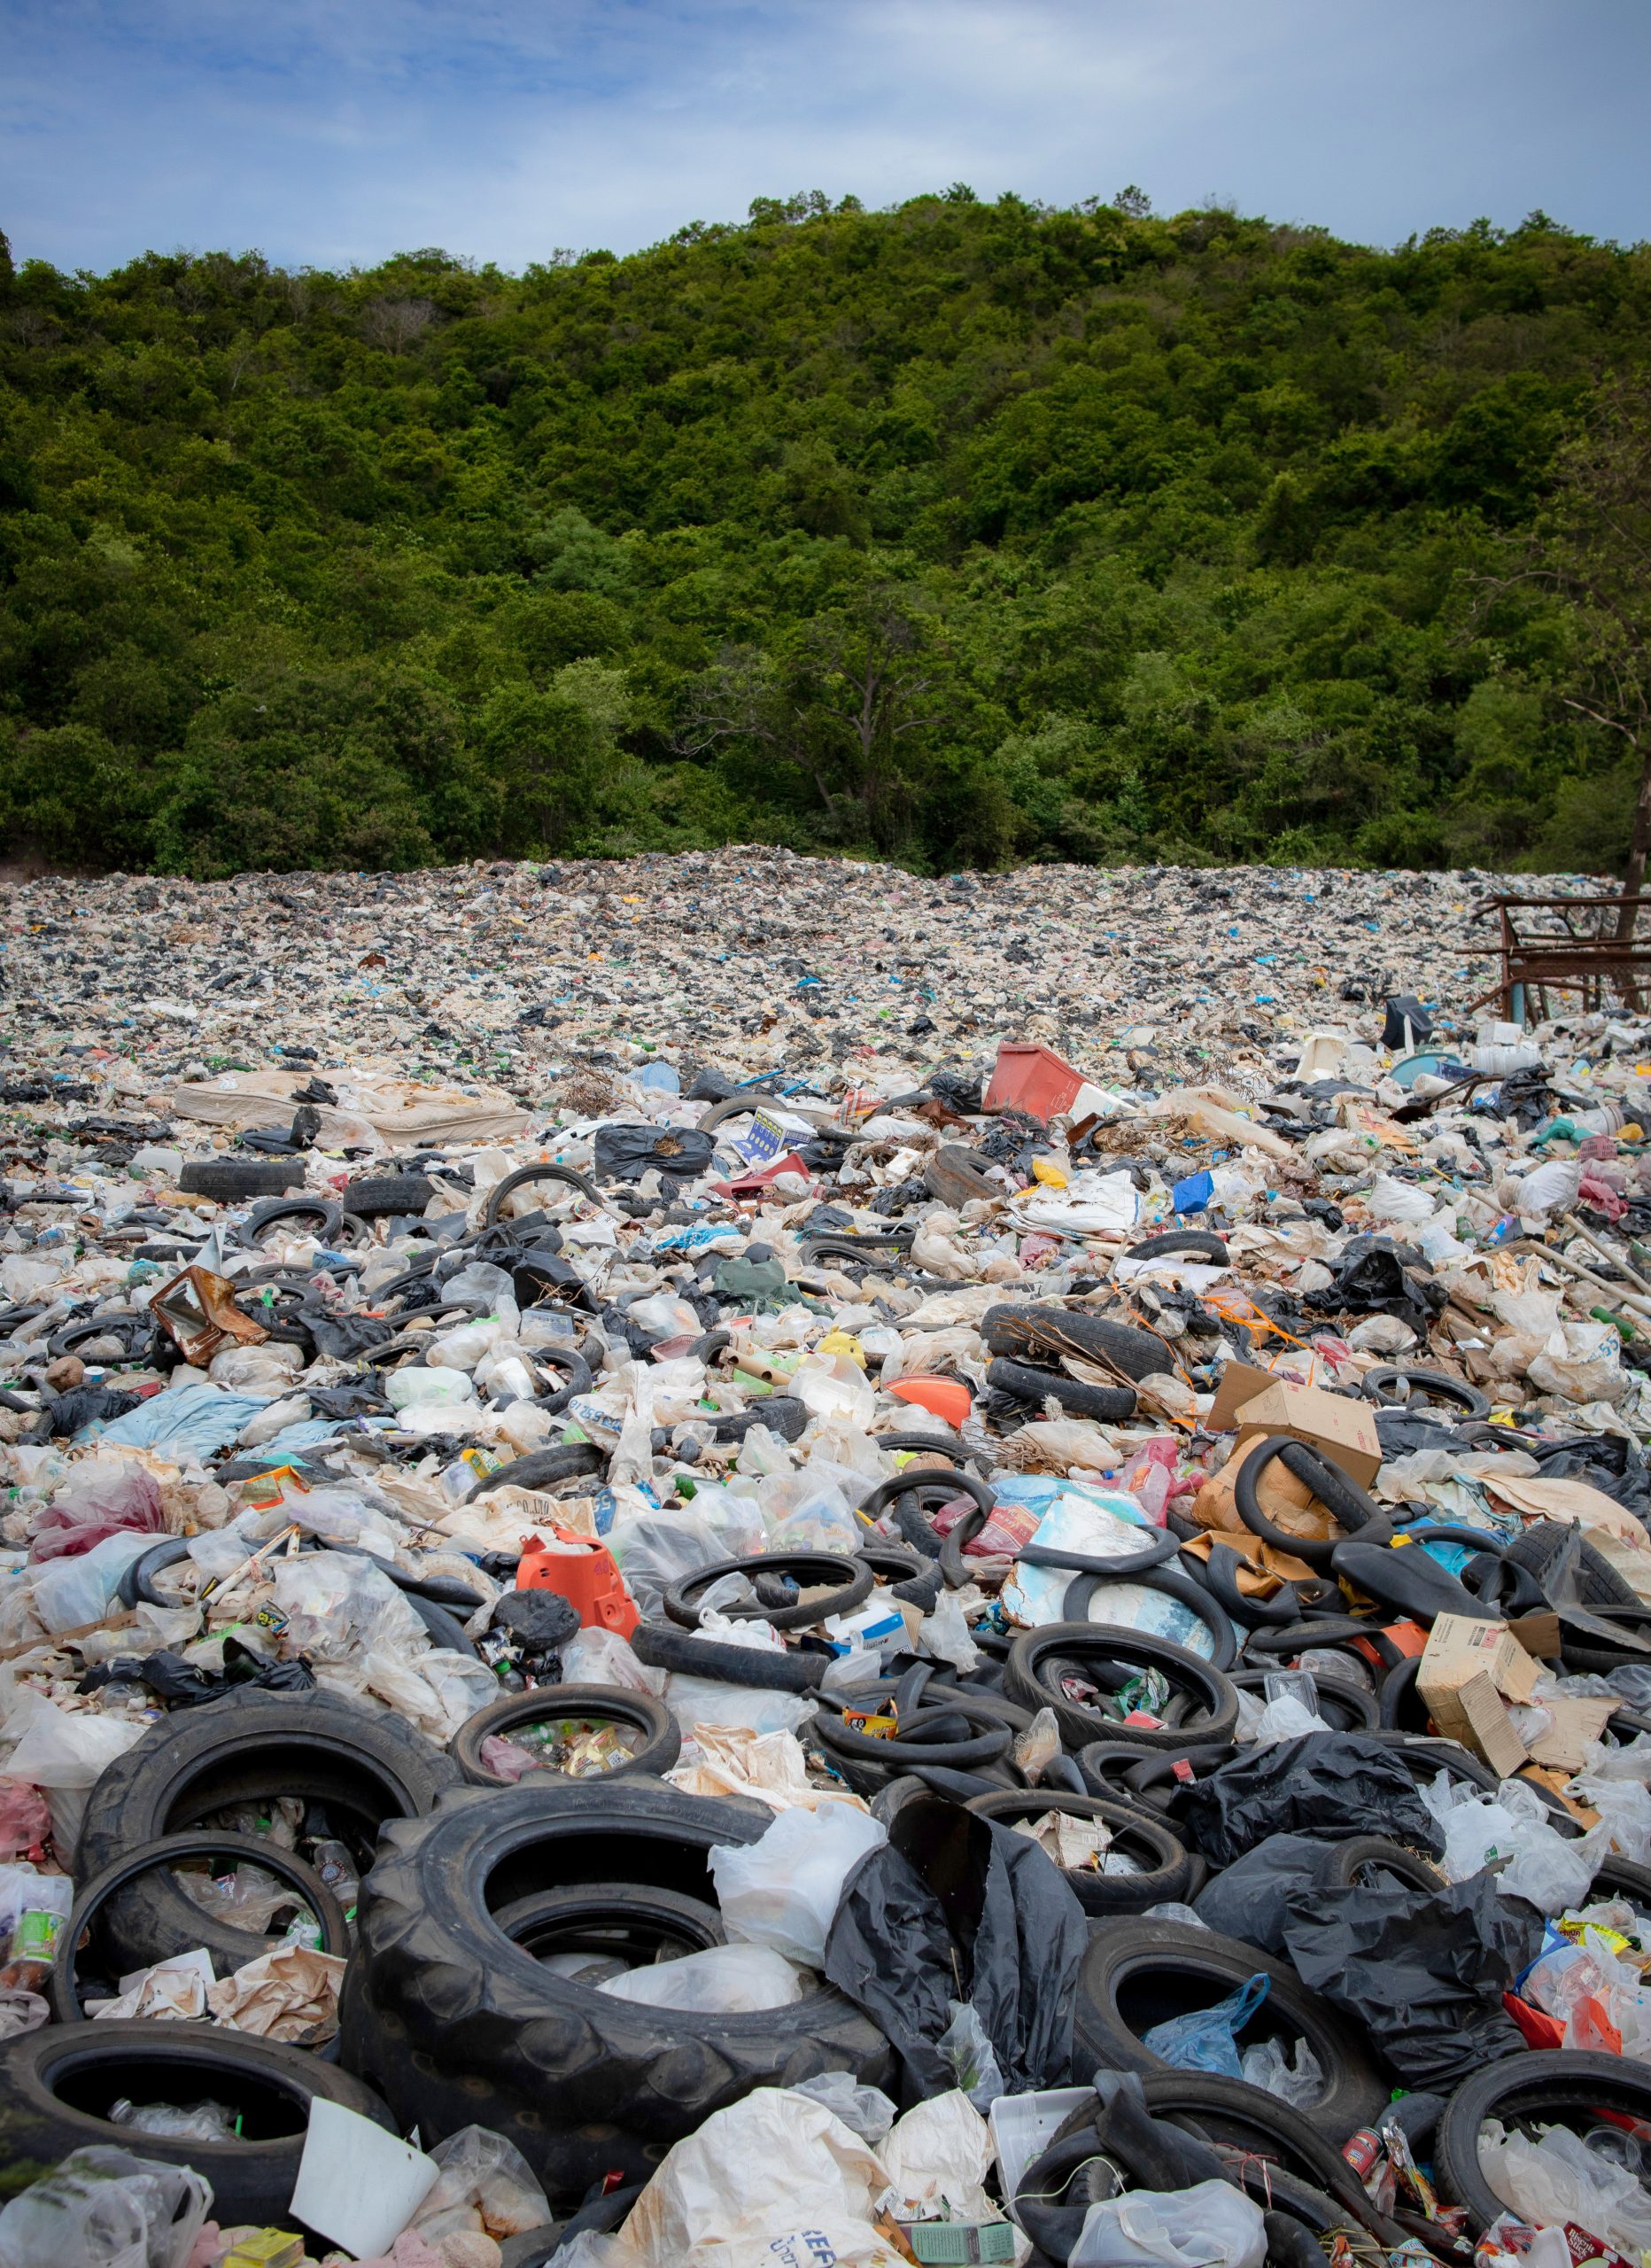 an enormous pile of plastic waste before a forest of trees